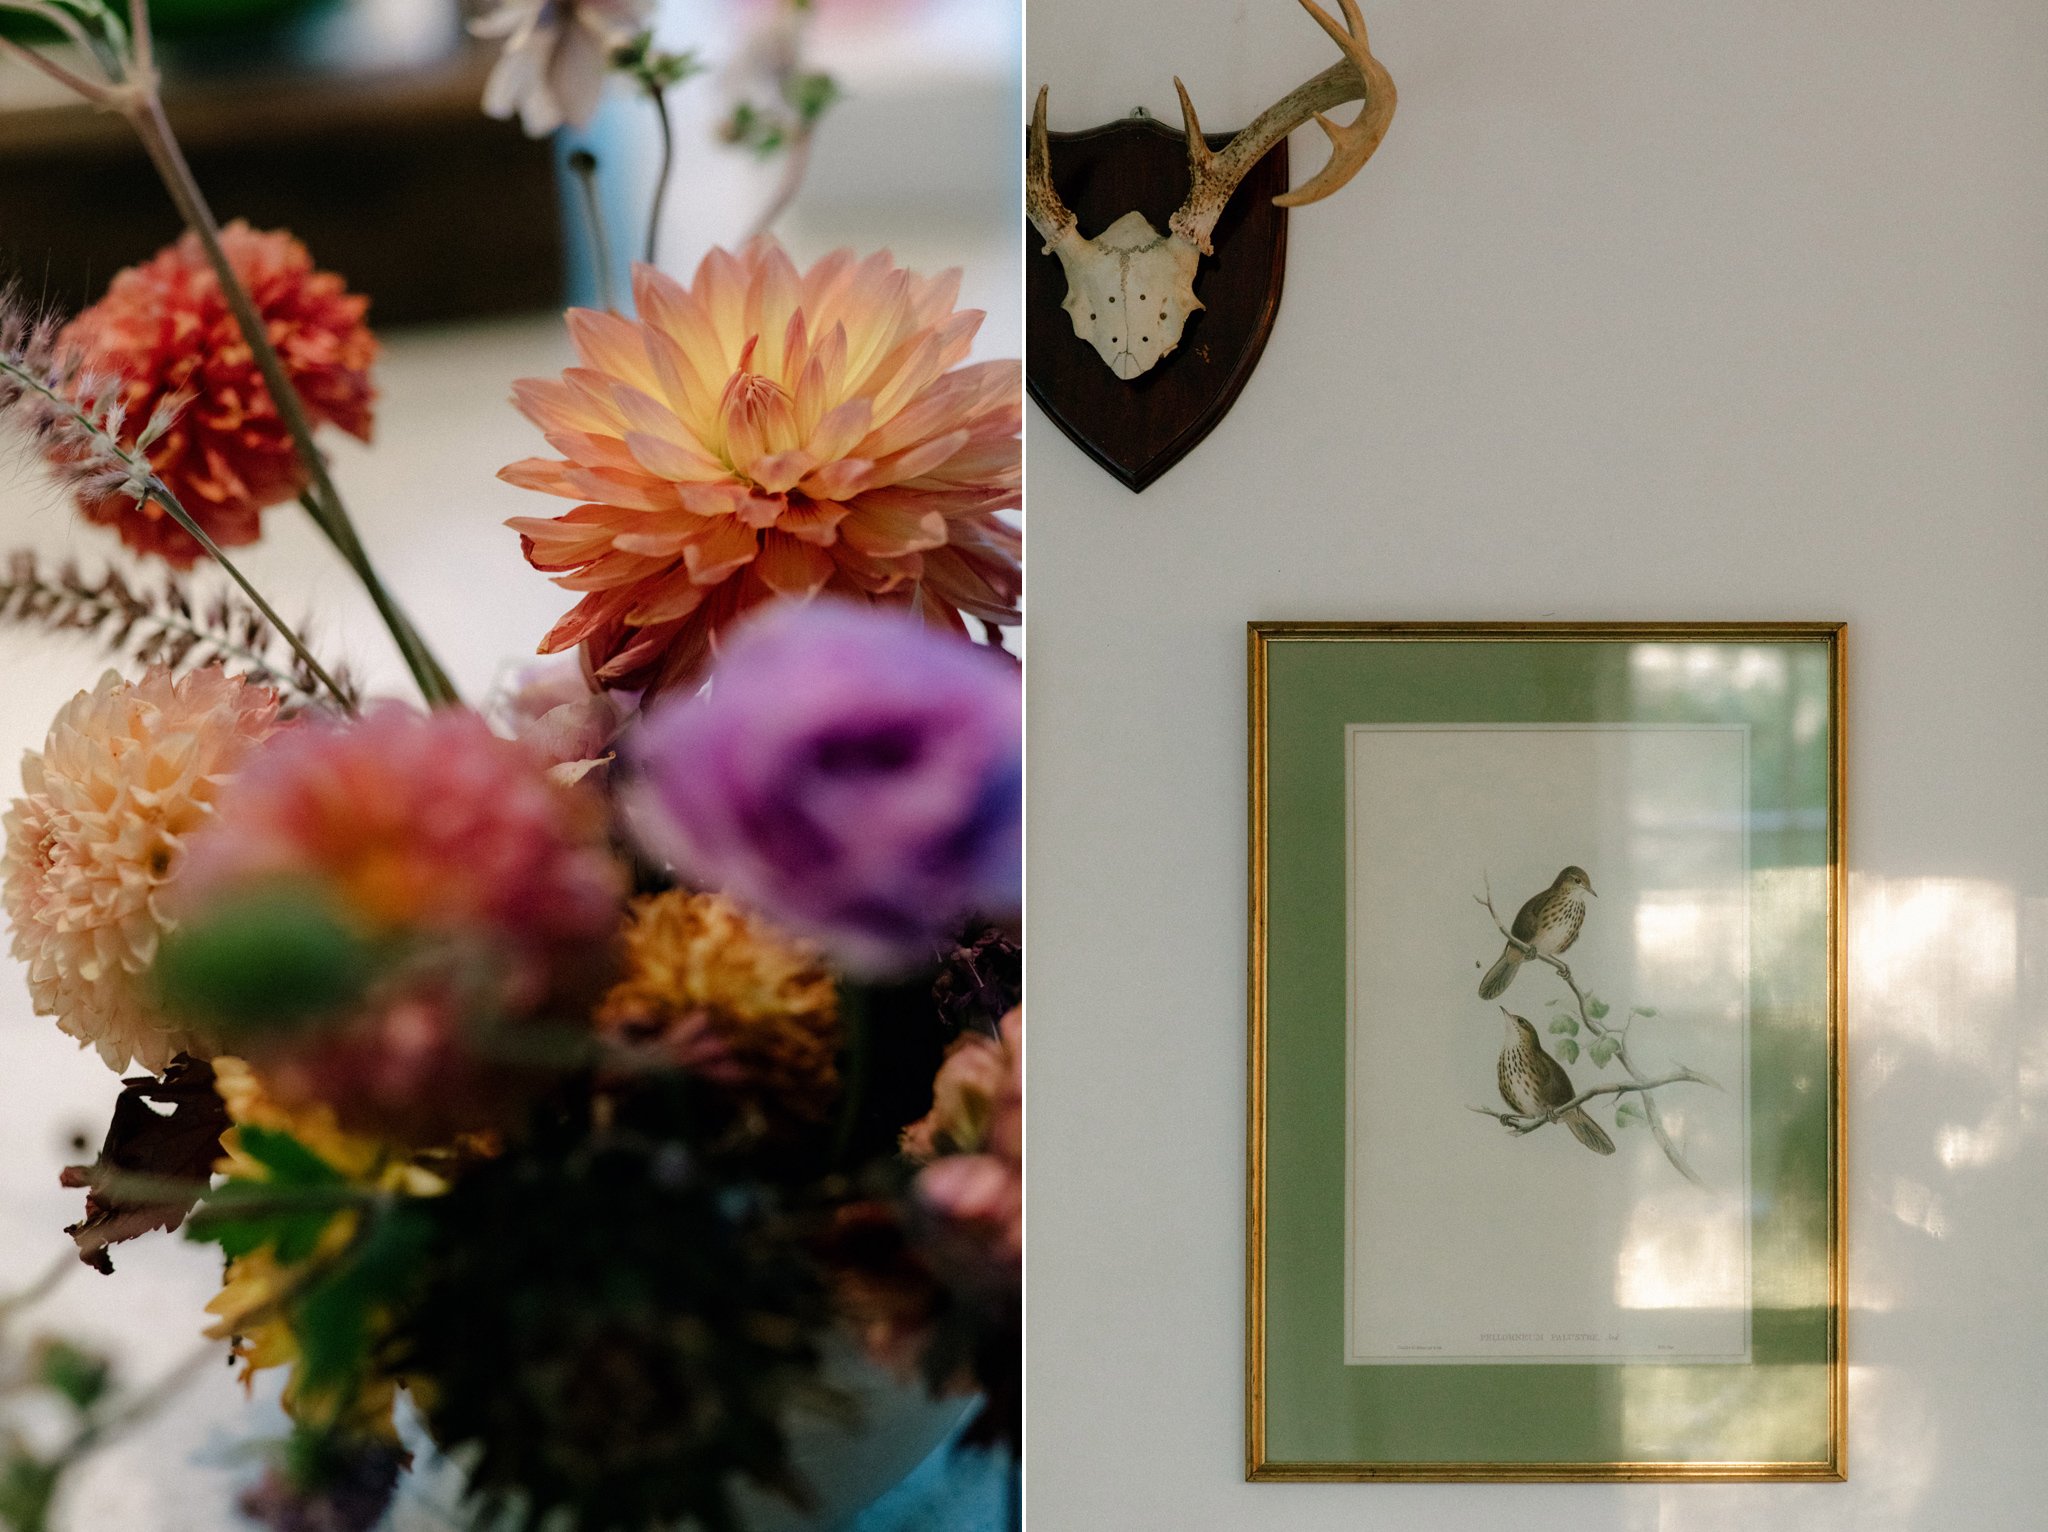 Flowers by Euclid Design Co. and bird prints